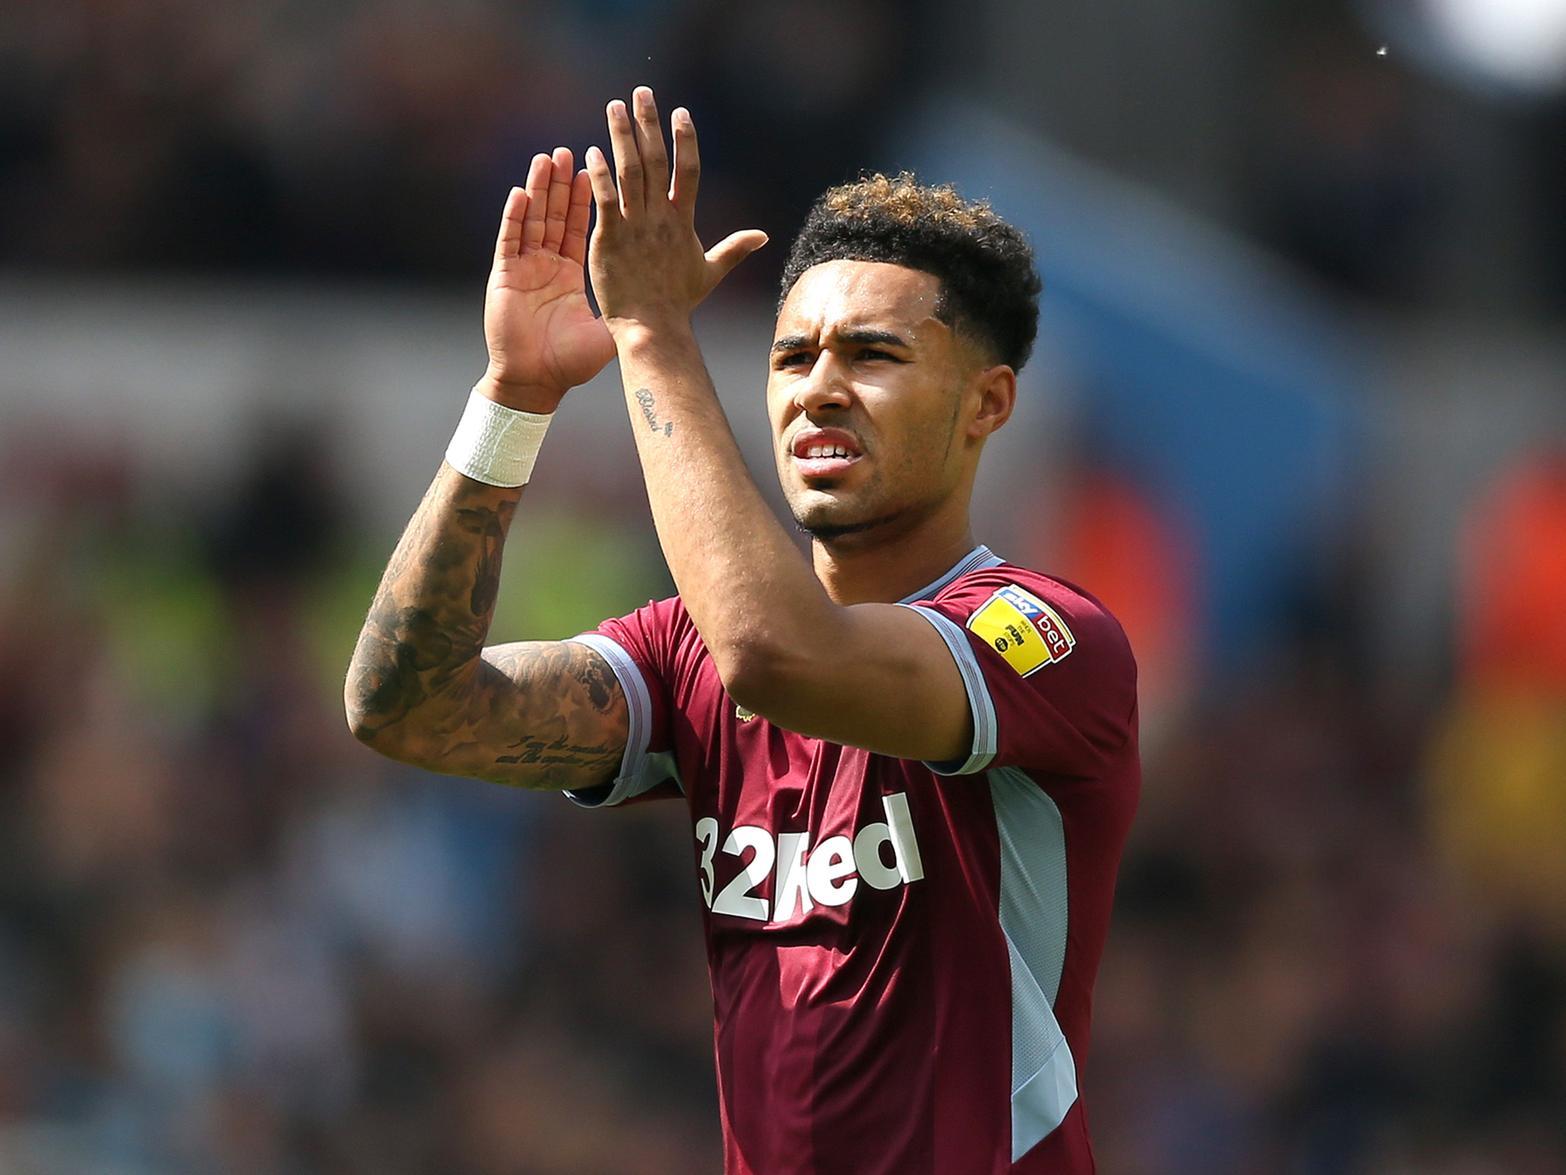 Aston Villa are reportedly ready to terminate Andre Green's loan deal at Preston North End, as they're unhappy with the meagre amount of first team football he's had at Deepdale. (Football Insider)